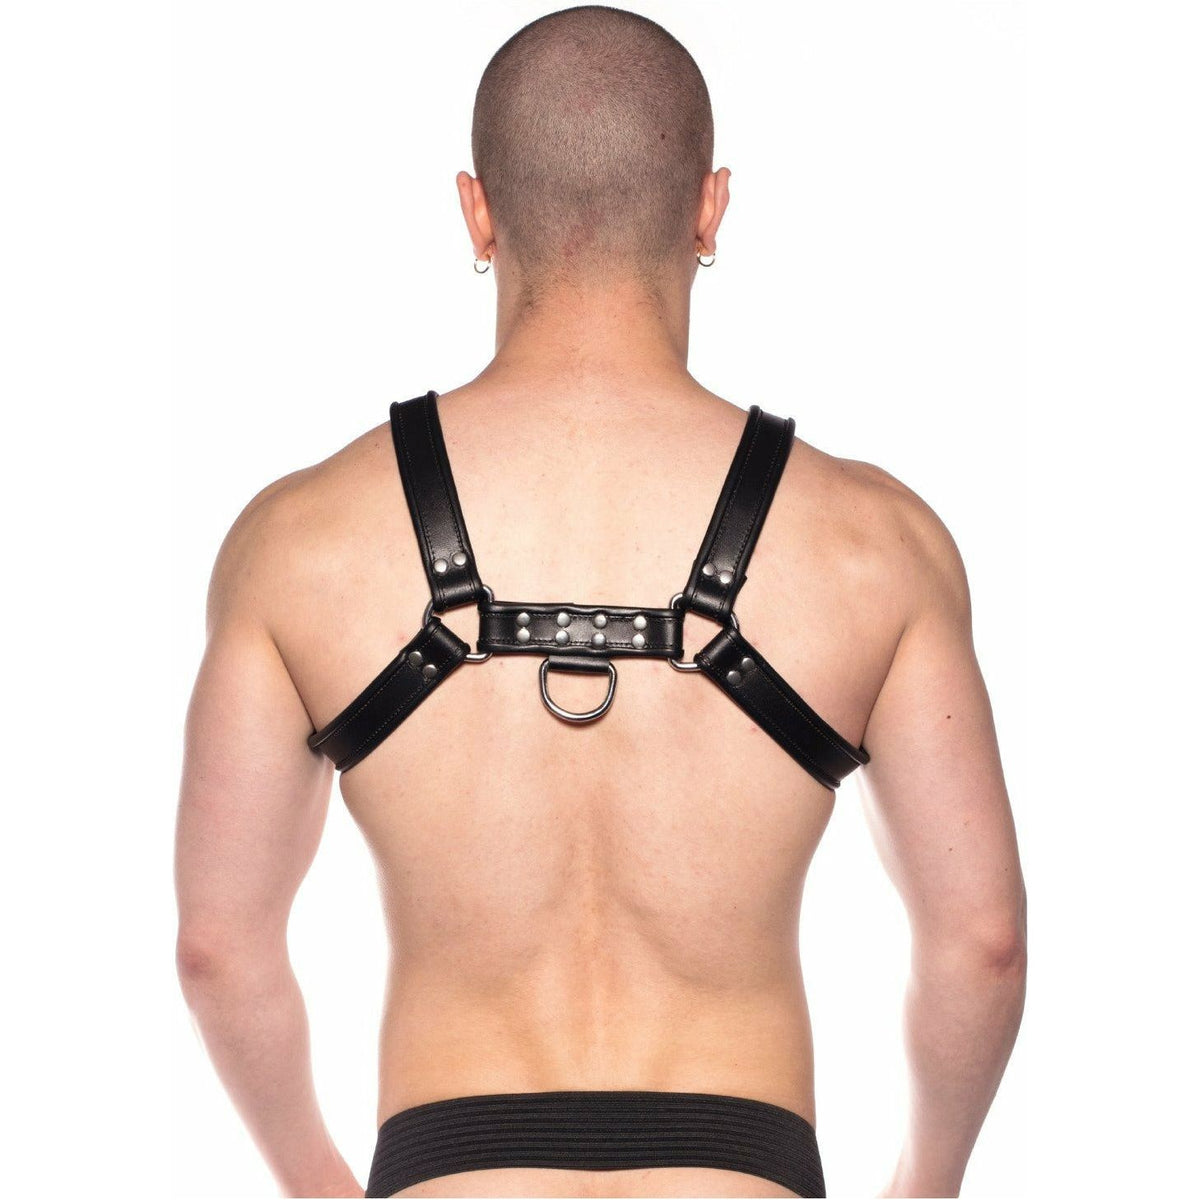 Prowler RED – Leather Bull Harness - Black - Extra Large